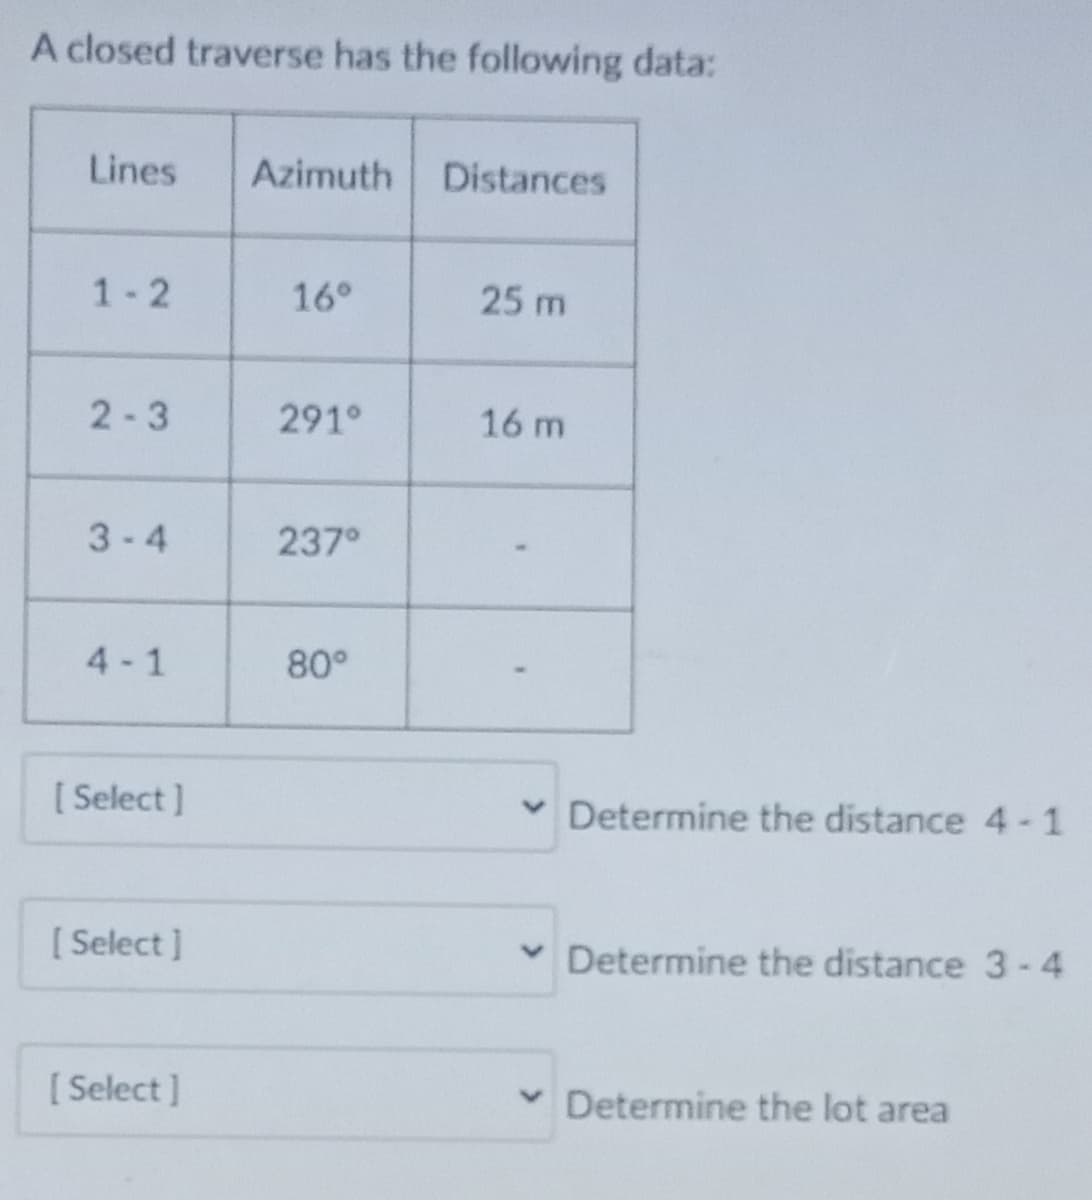 A closed traverse has the following data:
Lines
Azimuth
Distances
1-2
16°
25 m
2-3
291°
16 m
3-4
237°
4 - 1
80°
[ Select ]
v Determine the distance 4-1
[ Select ]
v Determine the distance 3-4
[ Select ]
Determine the lot area
